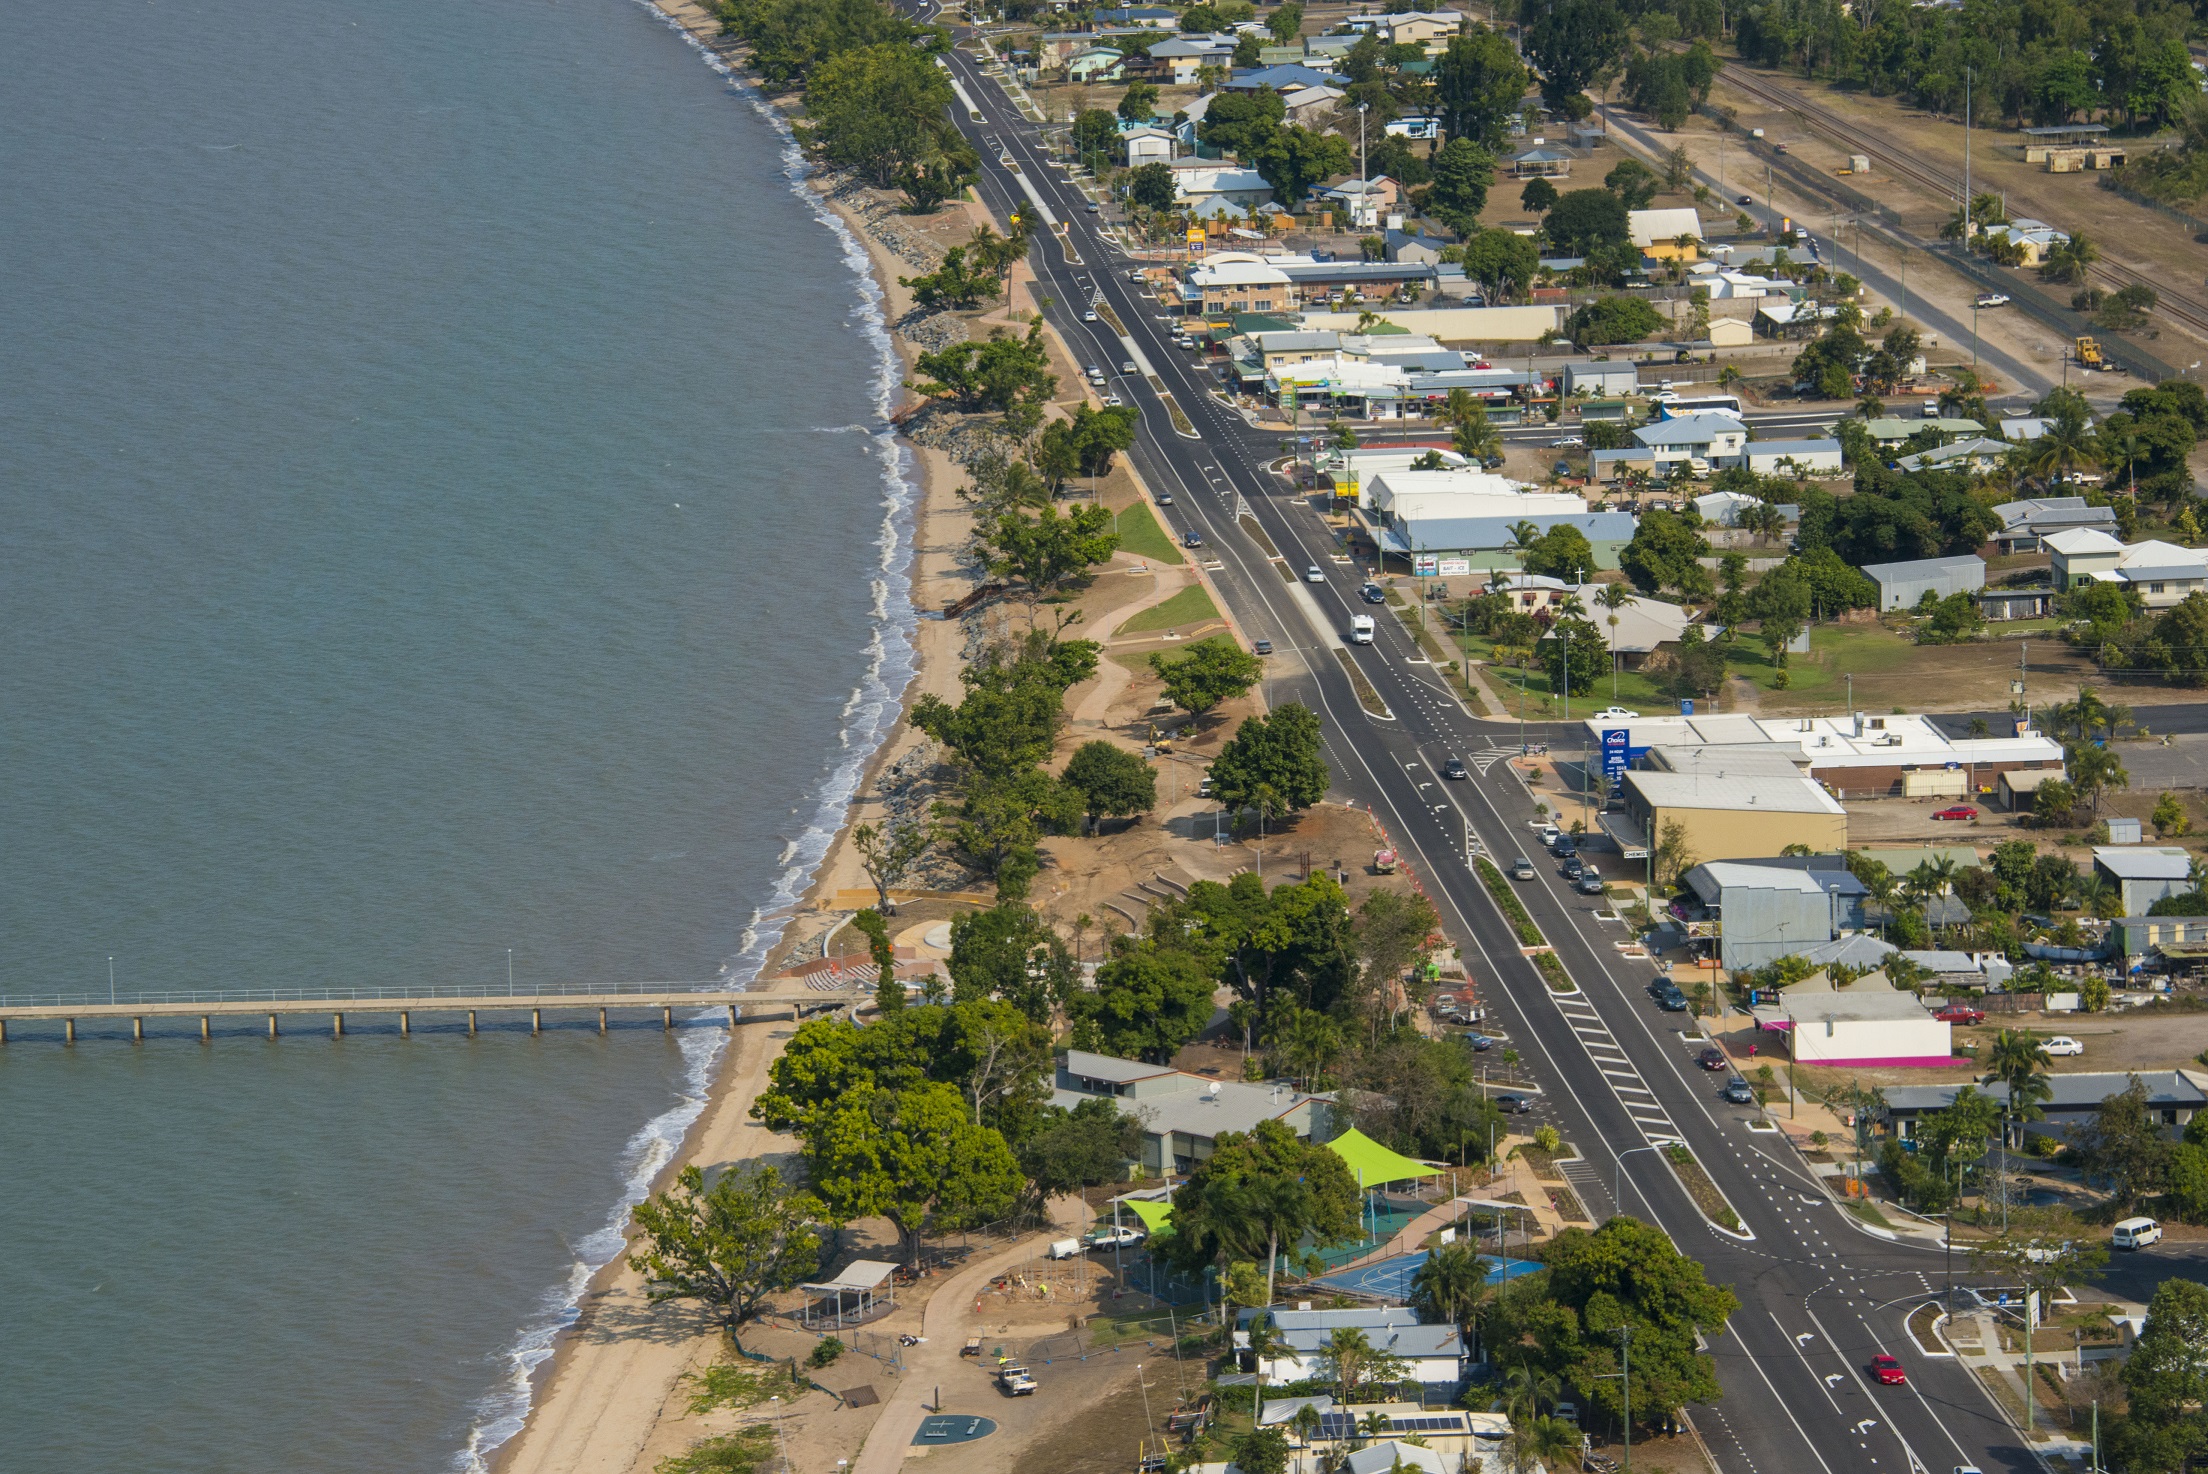 The reconstruction of the Bruce Highway through Cardwell was completed as part of the project. 